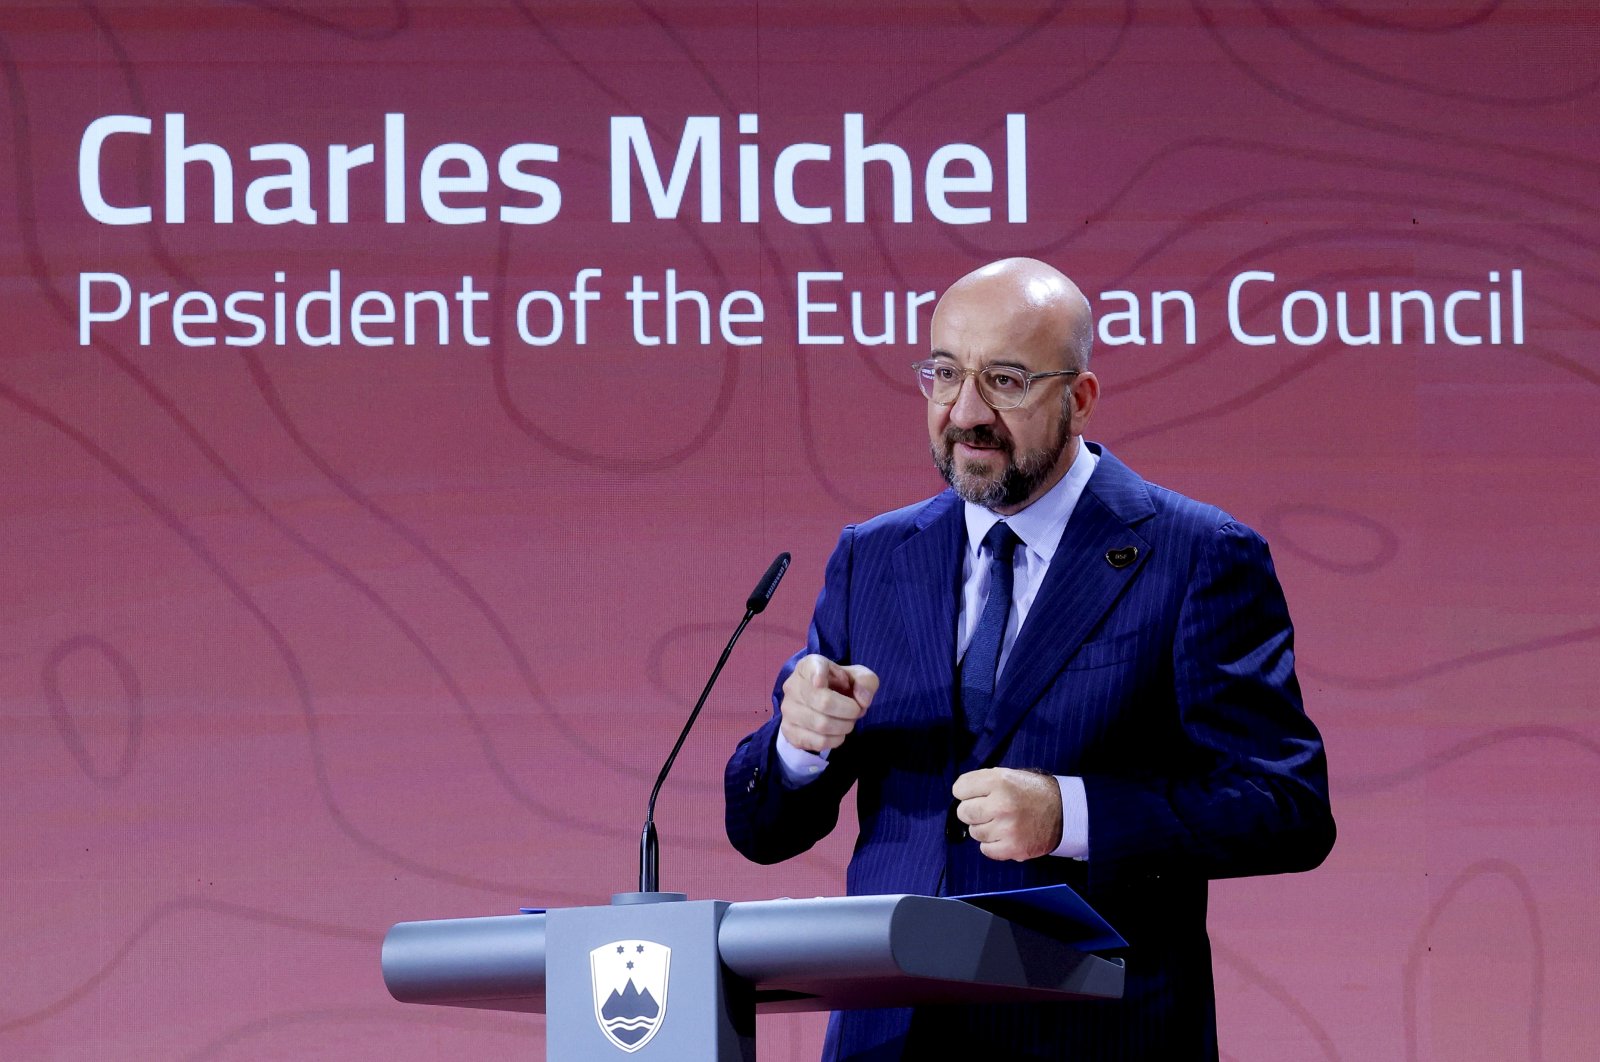 European Council President Charles Michel speaks during the Bled Strategic Forum 2023 at the Bled Festival Hall in Bled, Slovenia, Monday, Aug. 28, 2023. (Slovenian Government Press Service via AP)